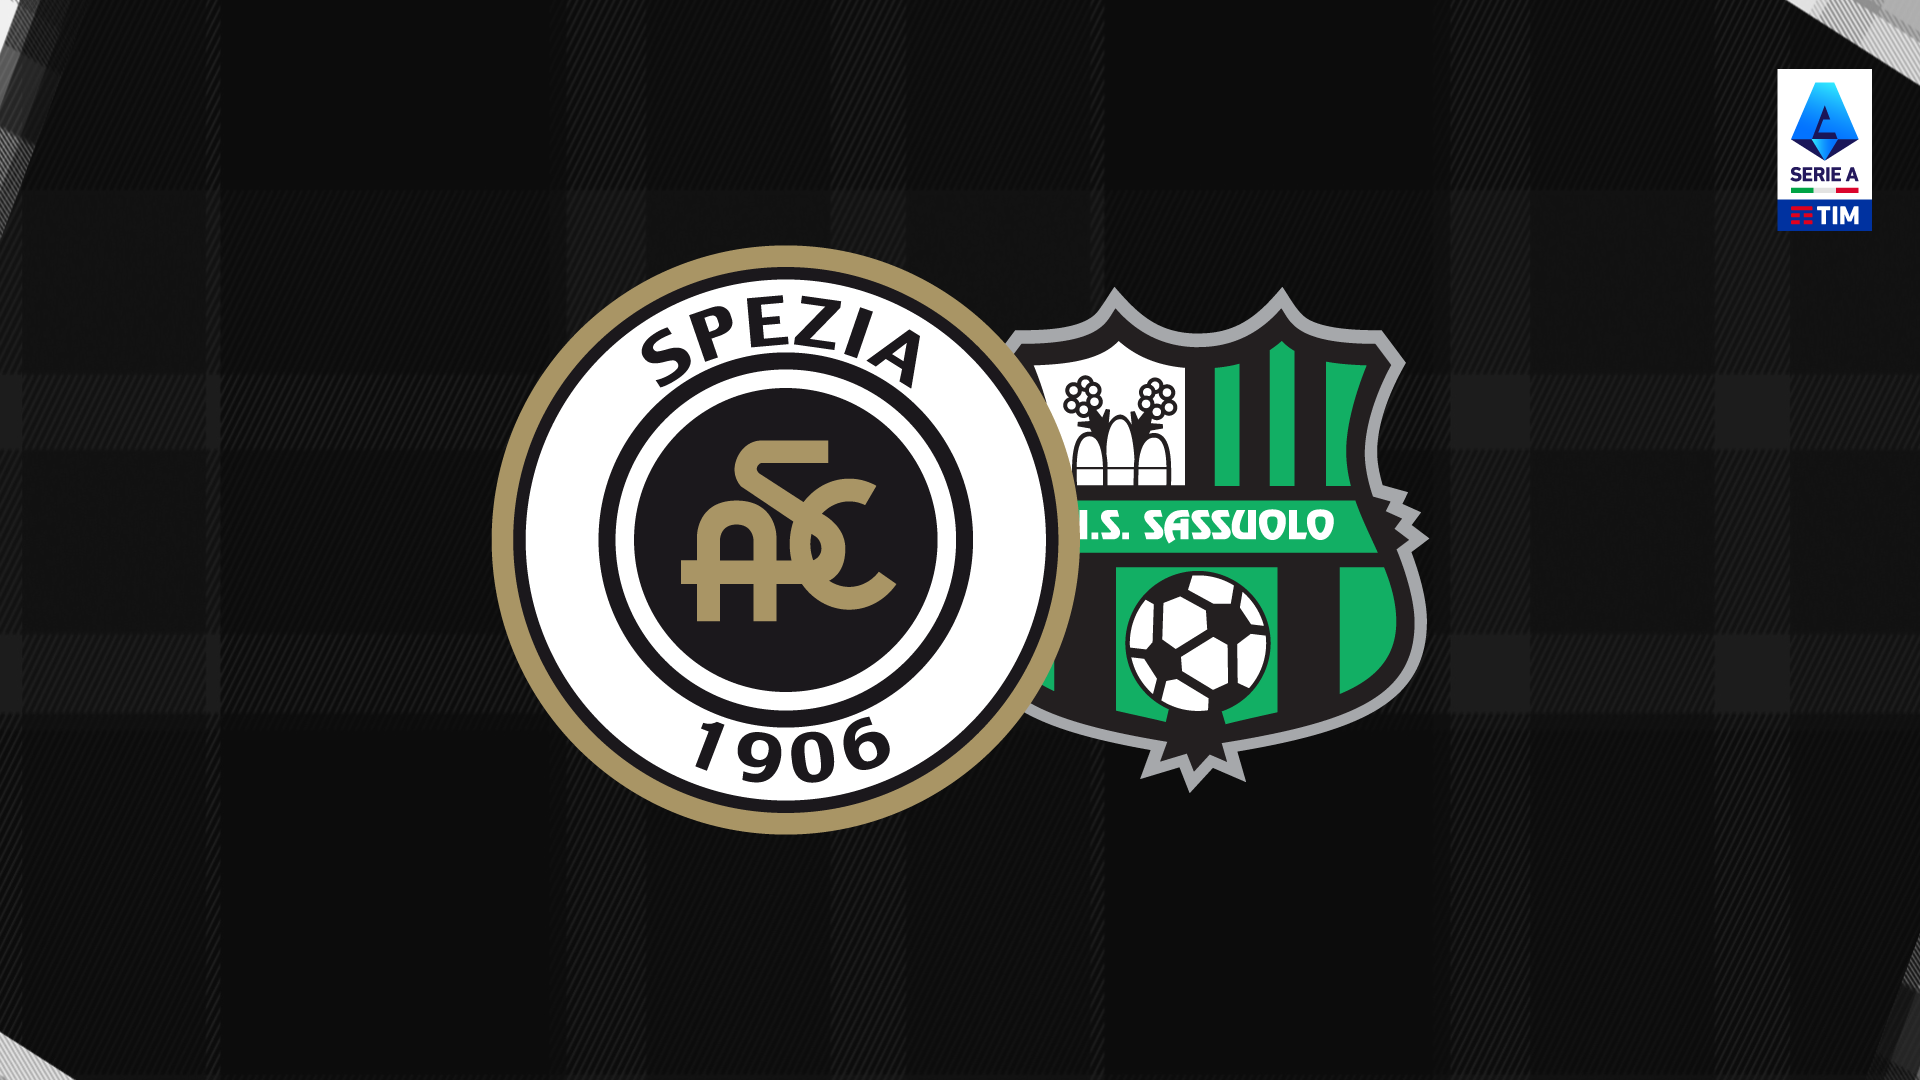 Spezia-Sassuolo: tickets available from August 18